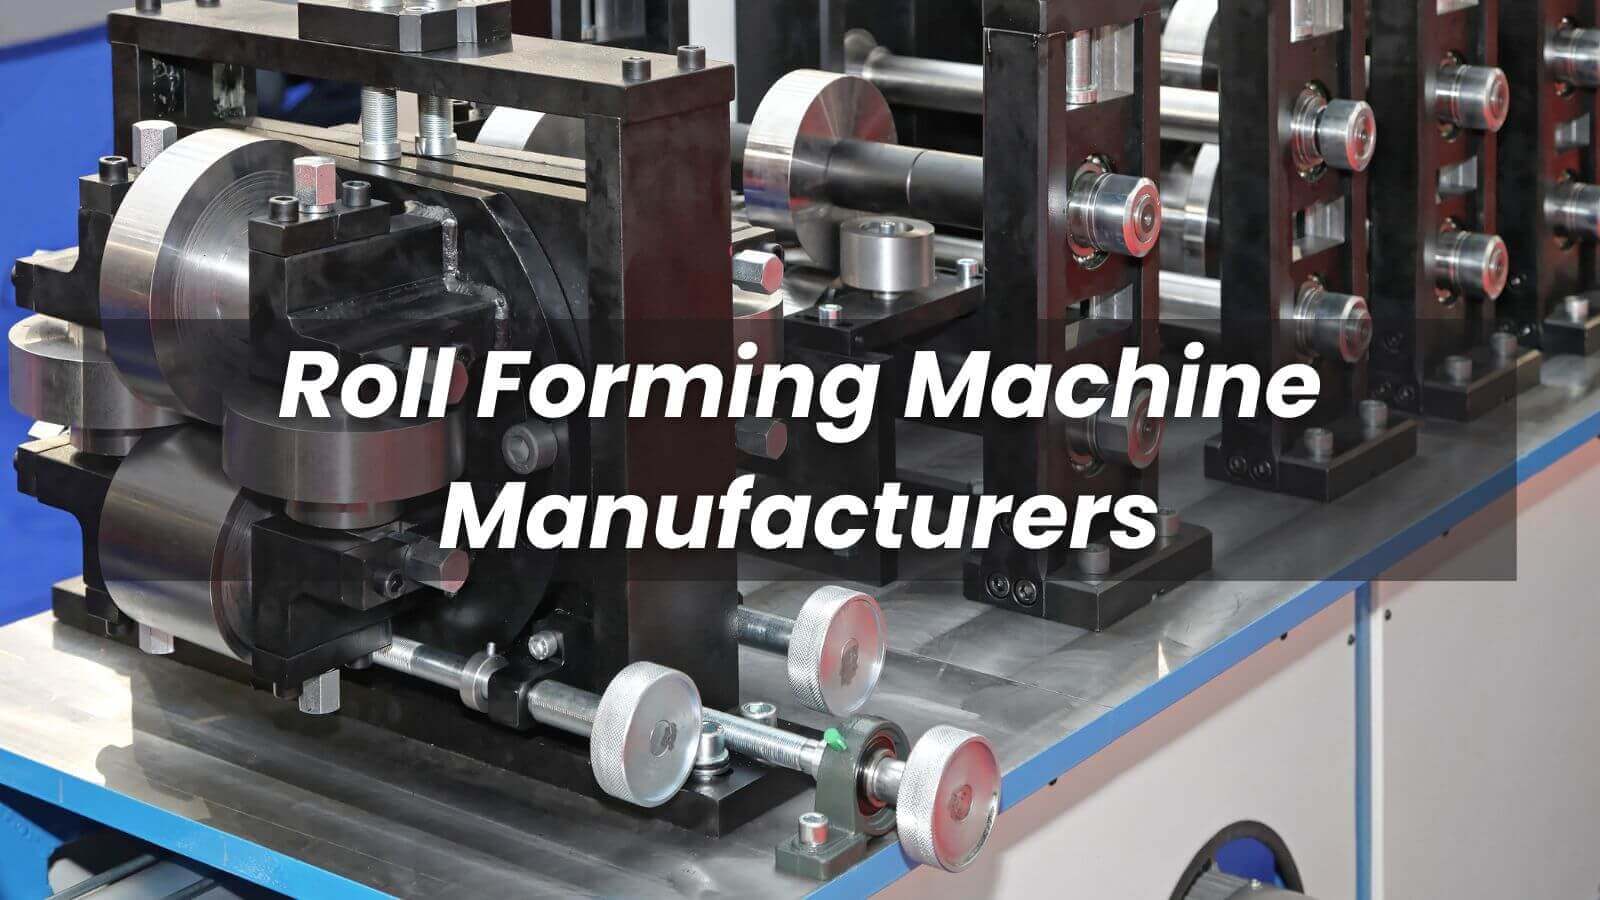 Roll Forming Machine Manufacturers in Pune